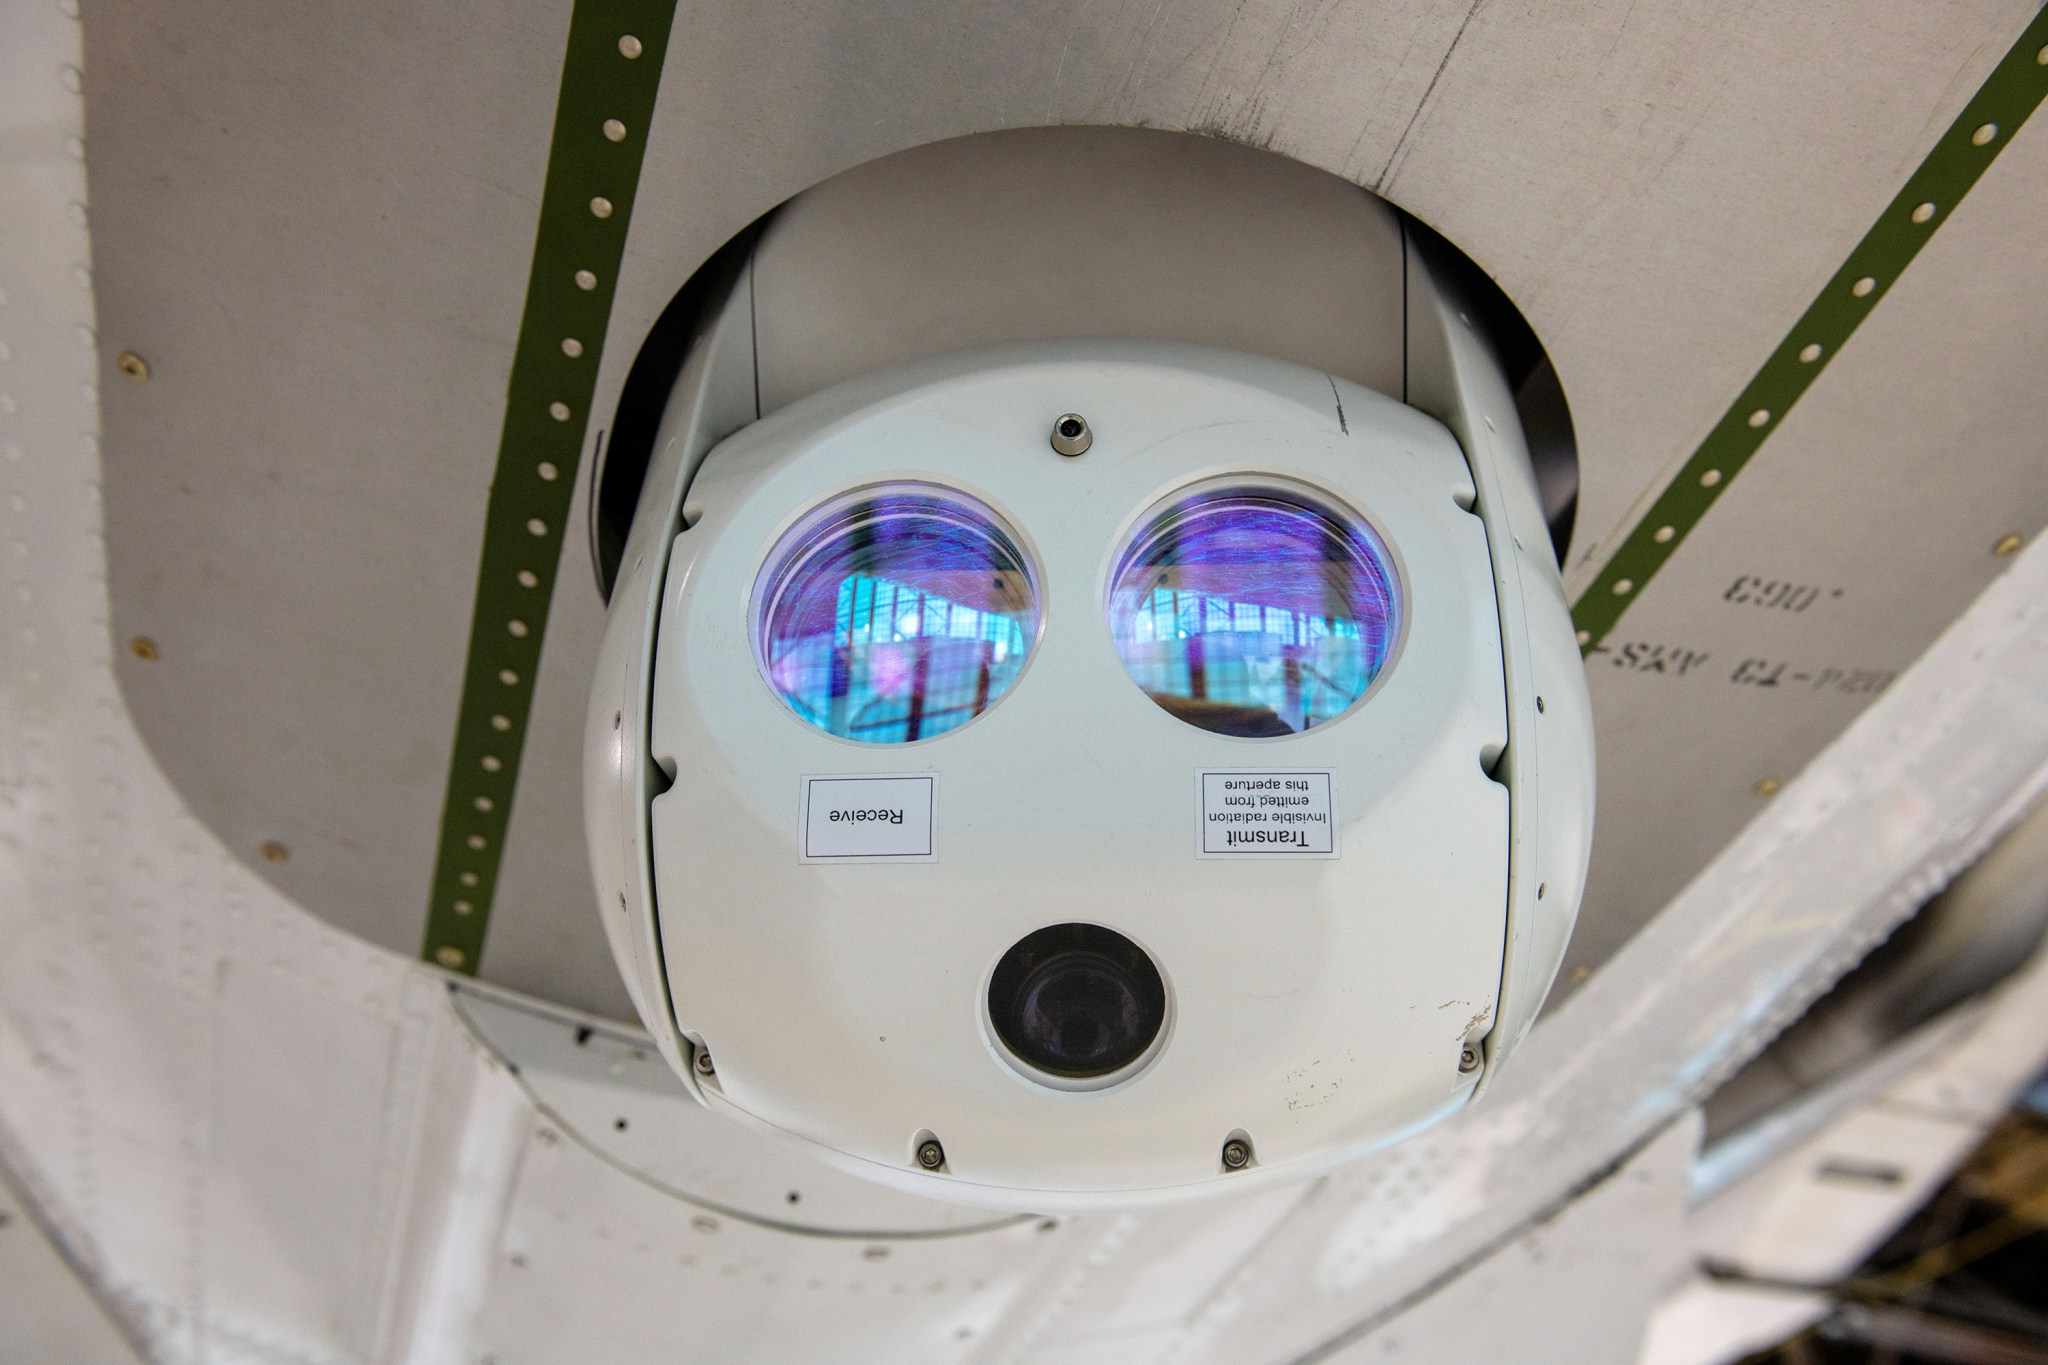 A laser communication device mounted on the underside of a Twin Otter research aircraft.